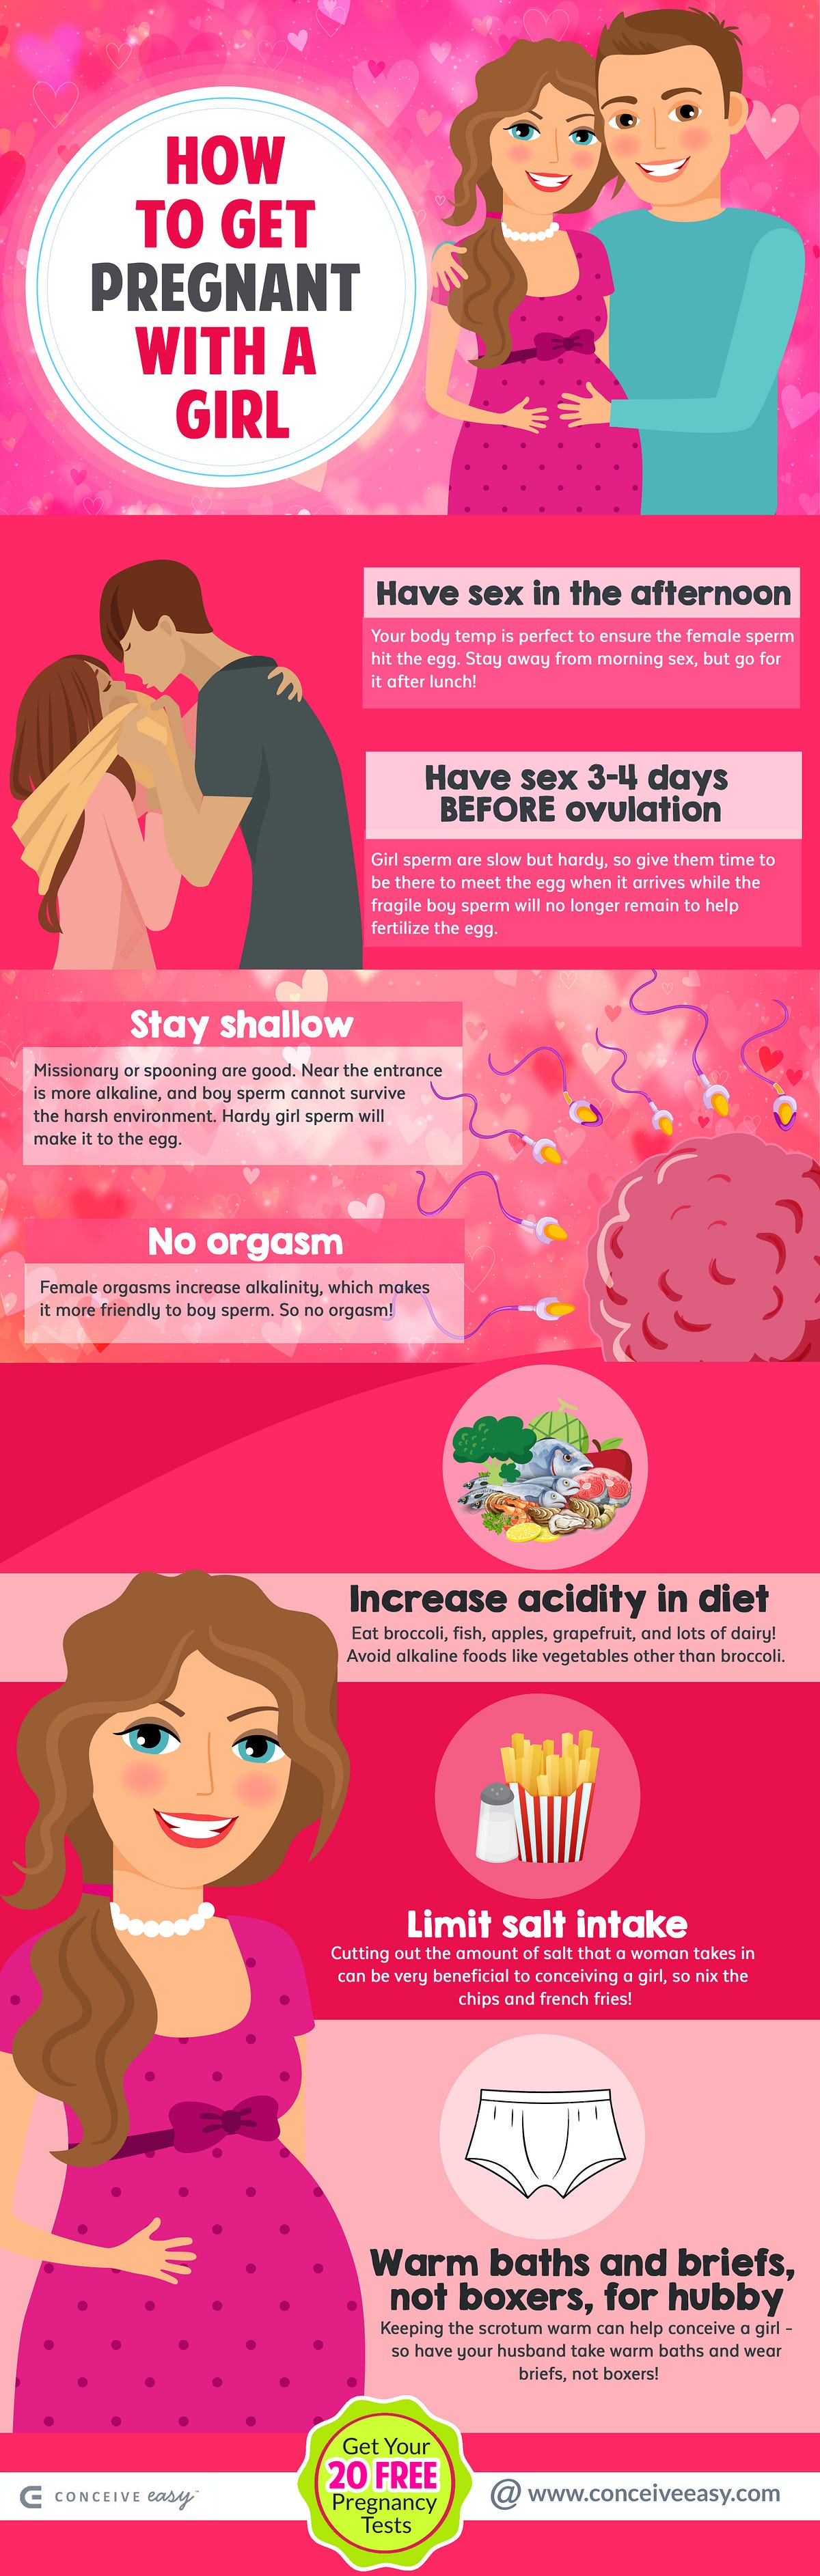 7 Tips How to Get Pregnant with a Girl Infographic by Conceive Easy Medium picture